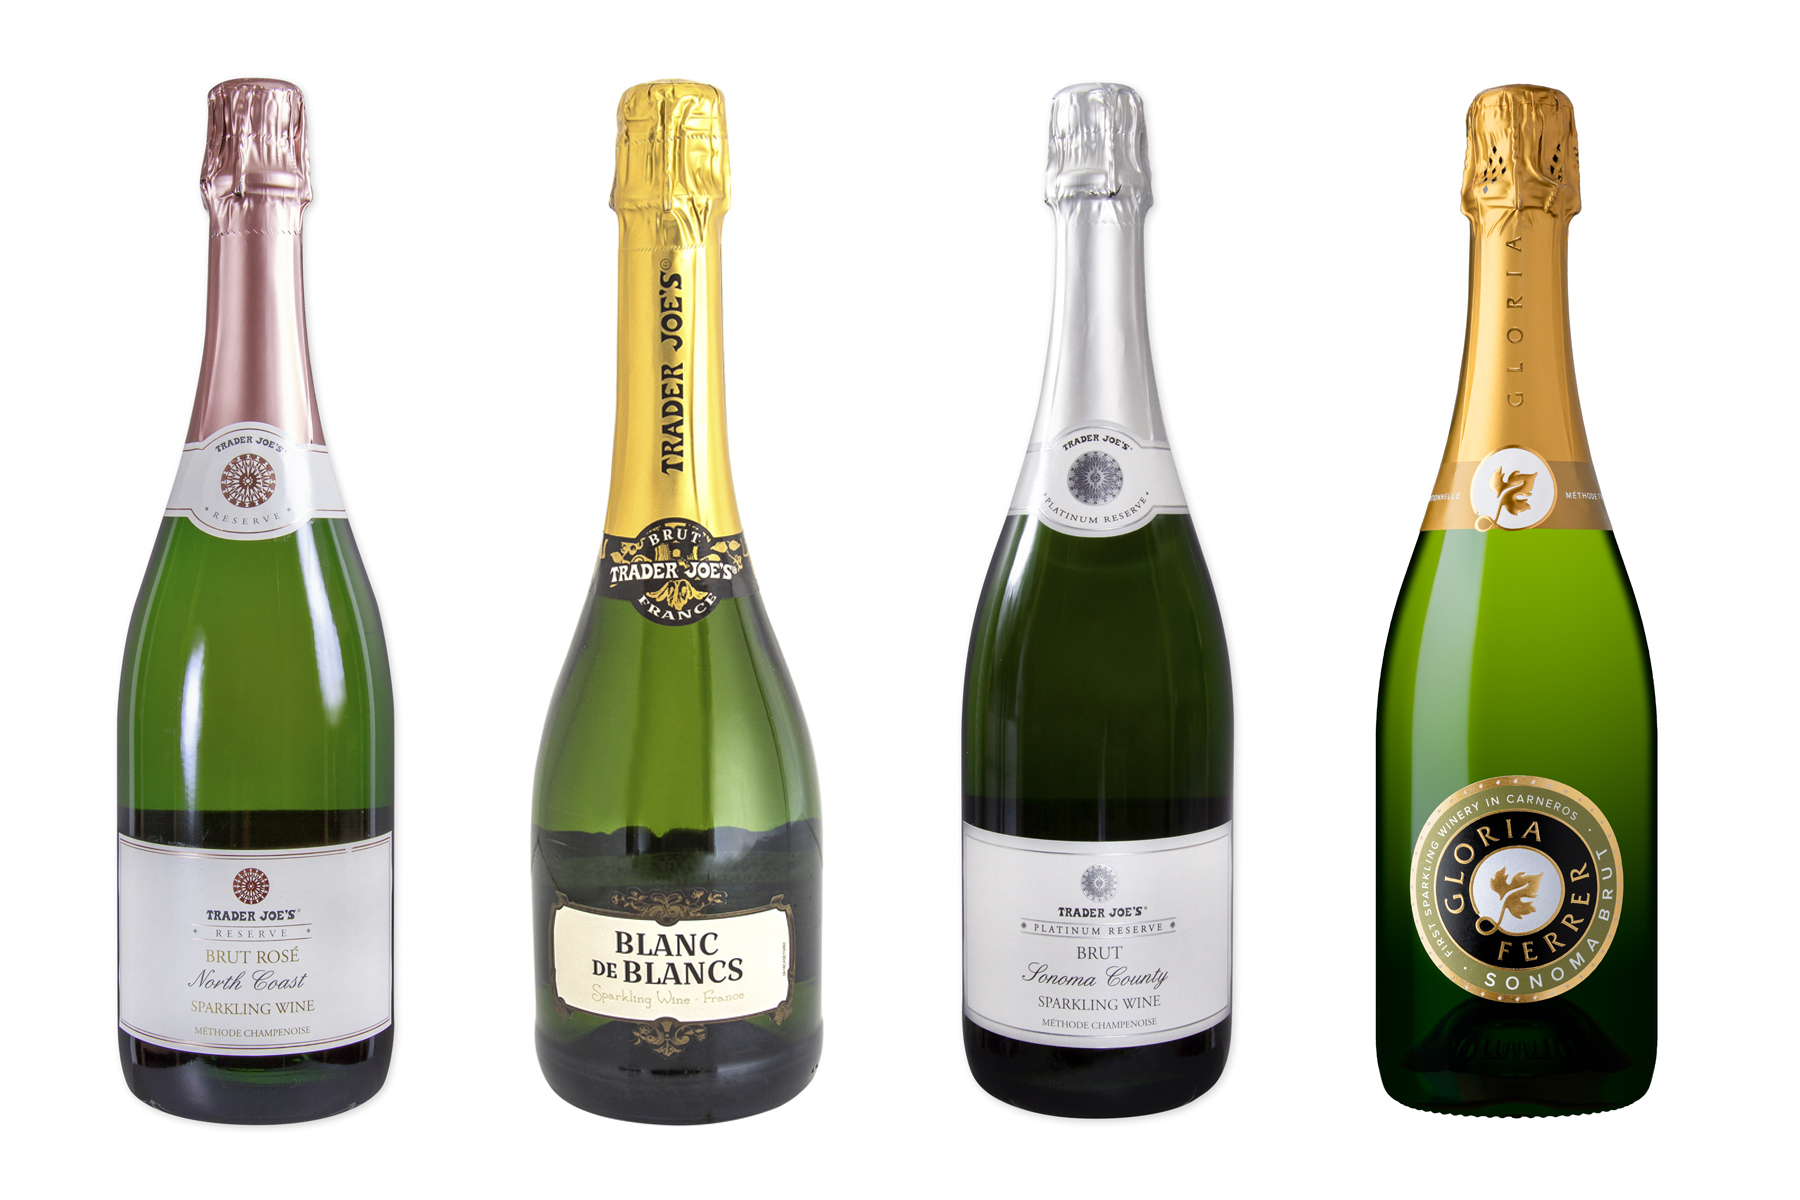 We tried a lot of Trader Joe's sparkling wines. These are the 7 best